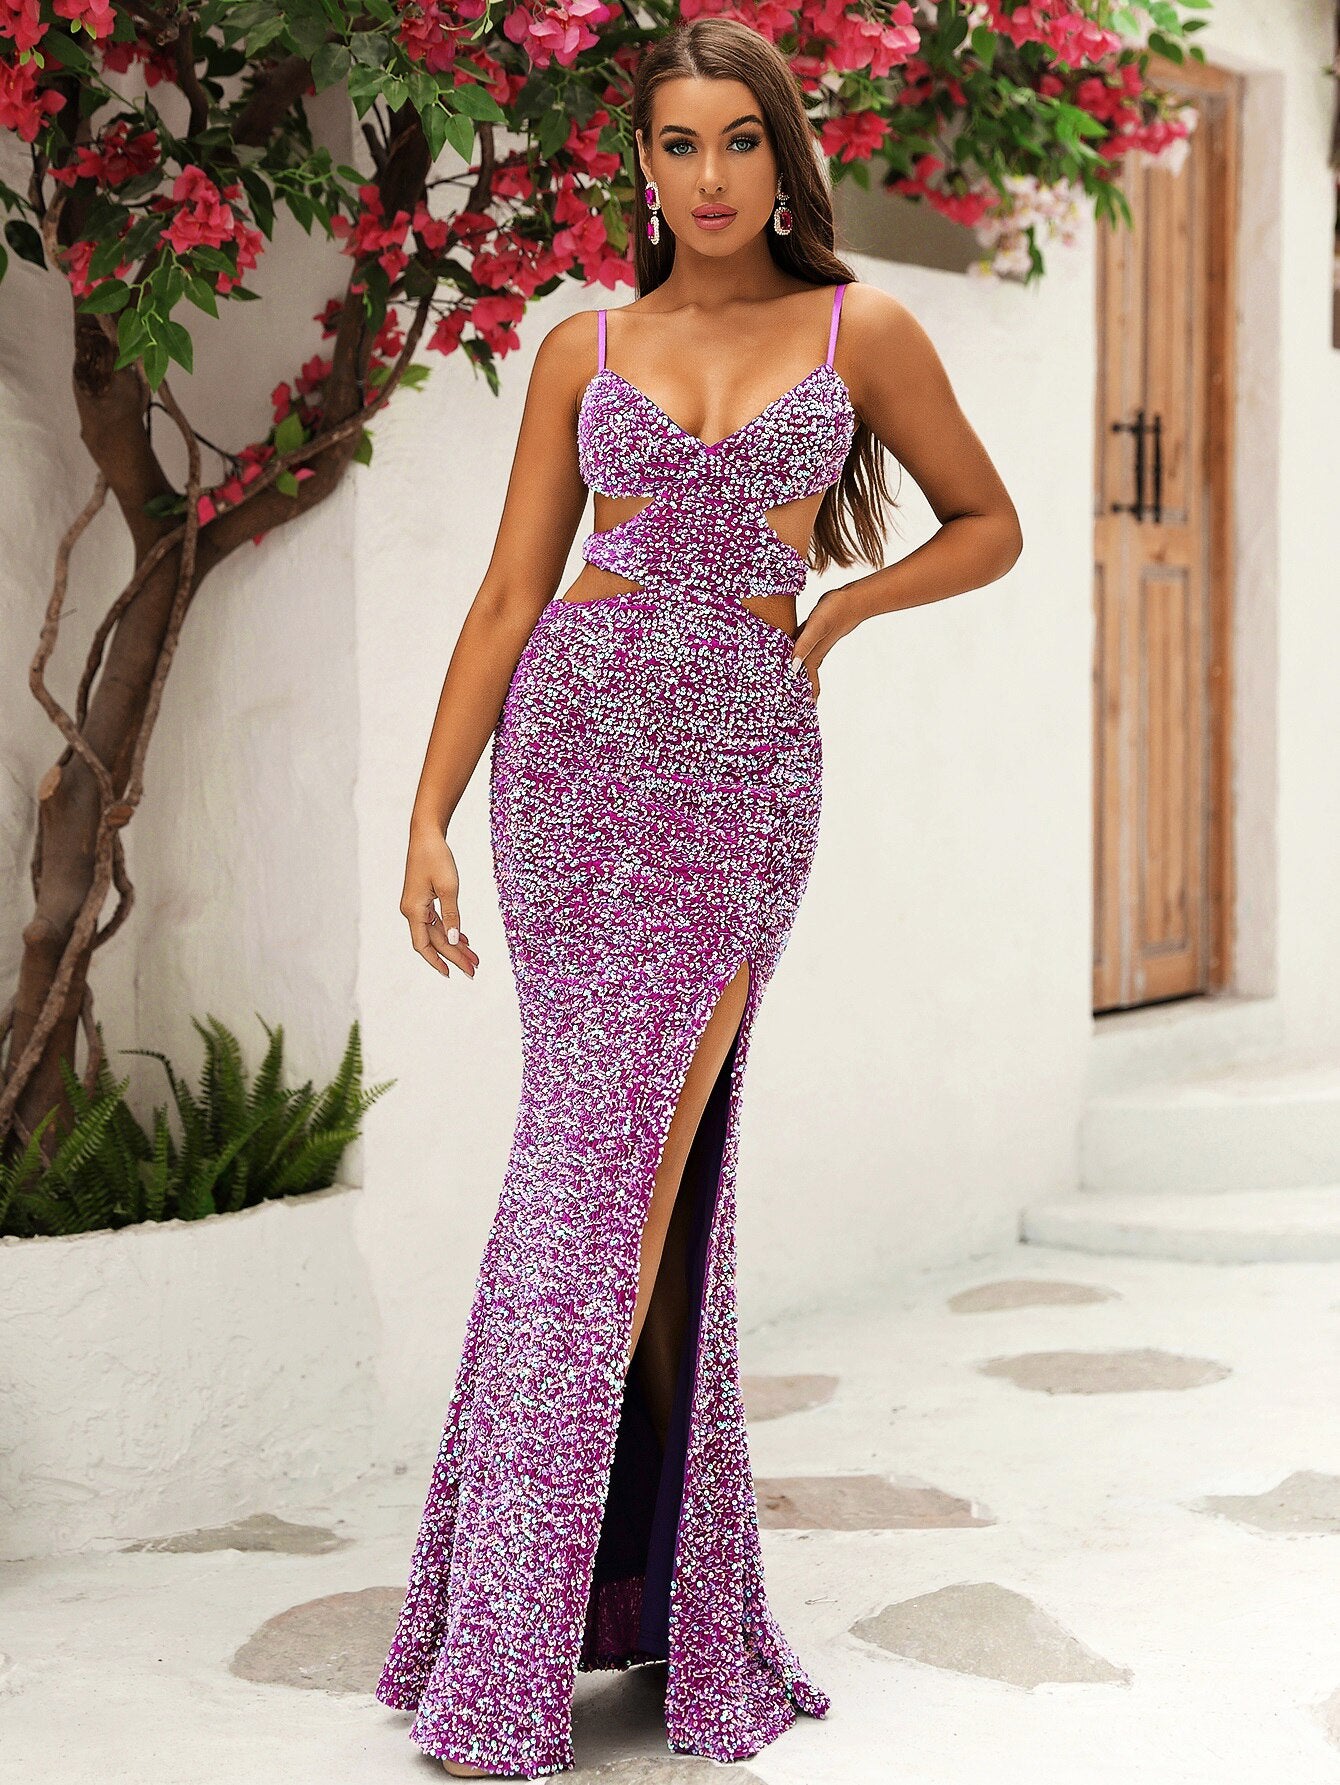 V-neck Strap Back Hollow Out Sleeveless Slim Fitting Sequin Maxi Dress